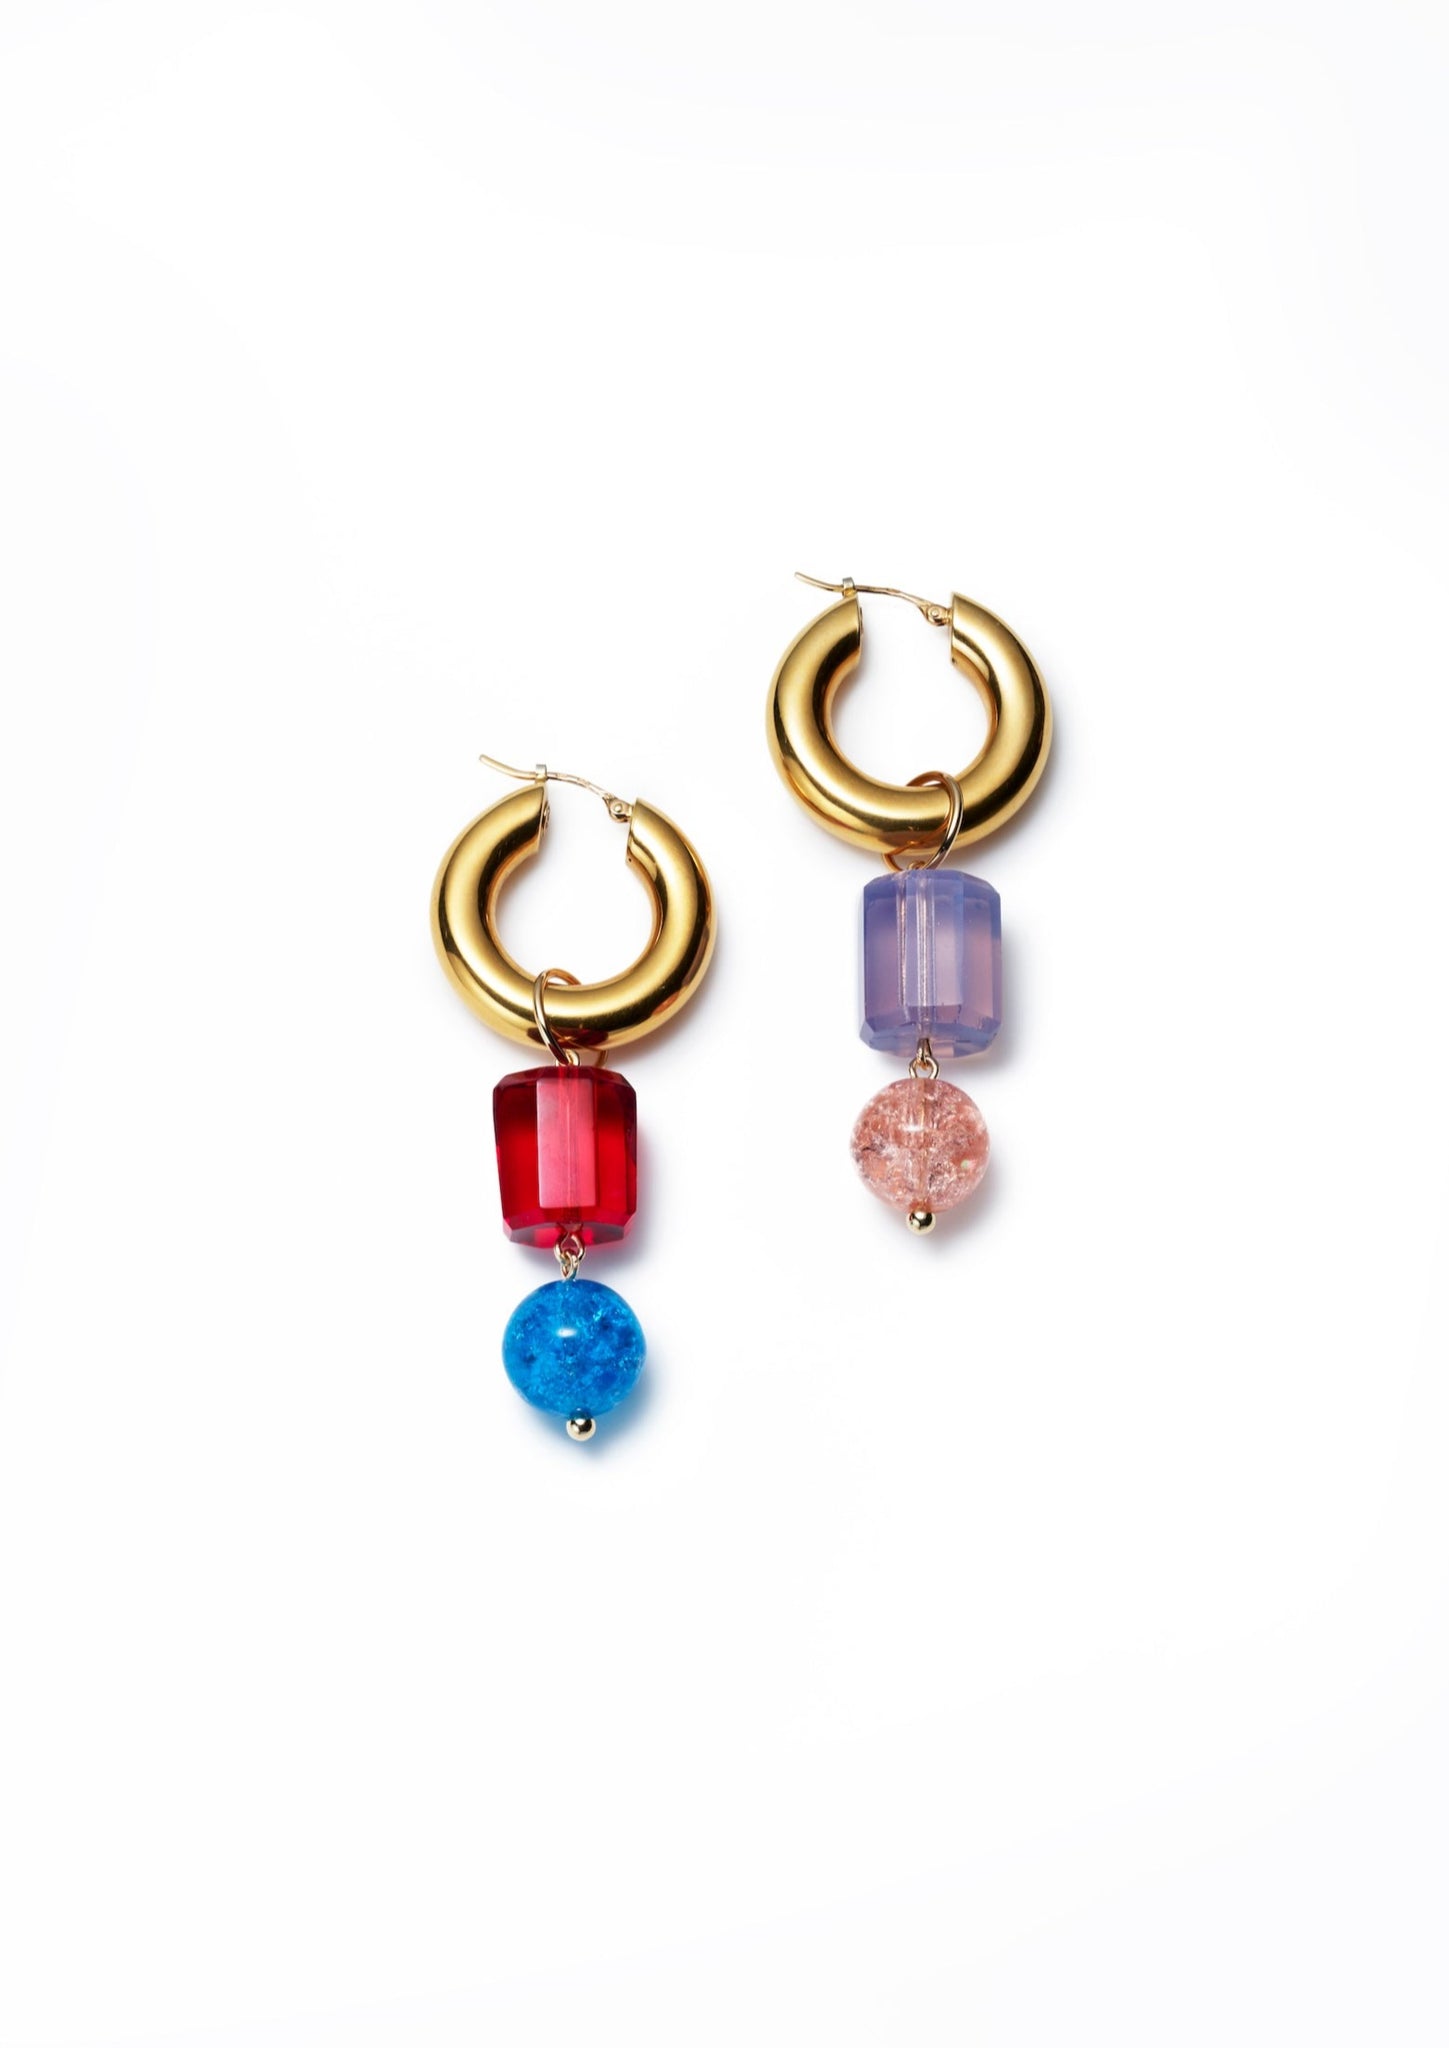 Expensive Candy earrings